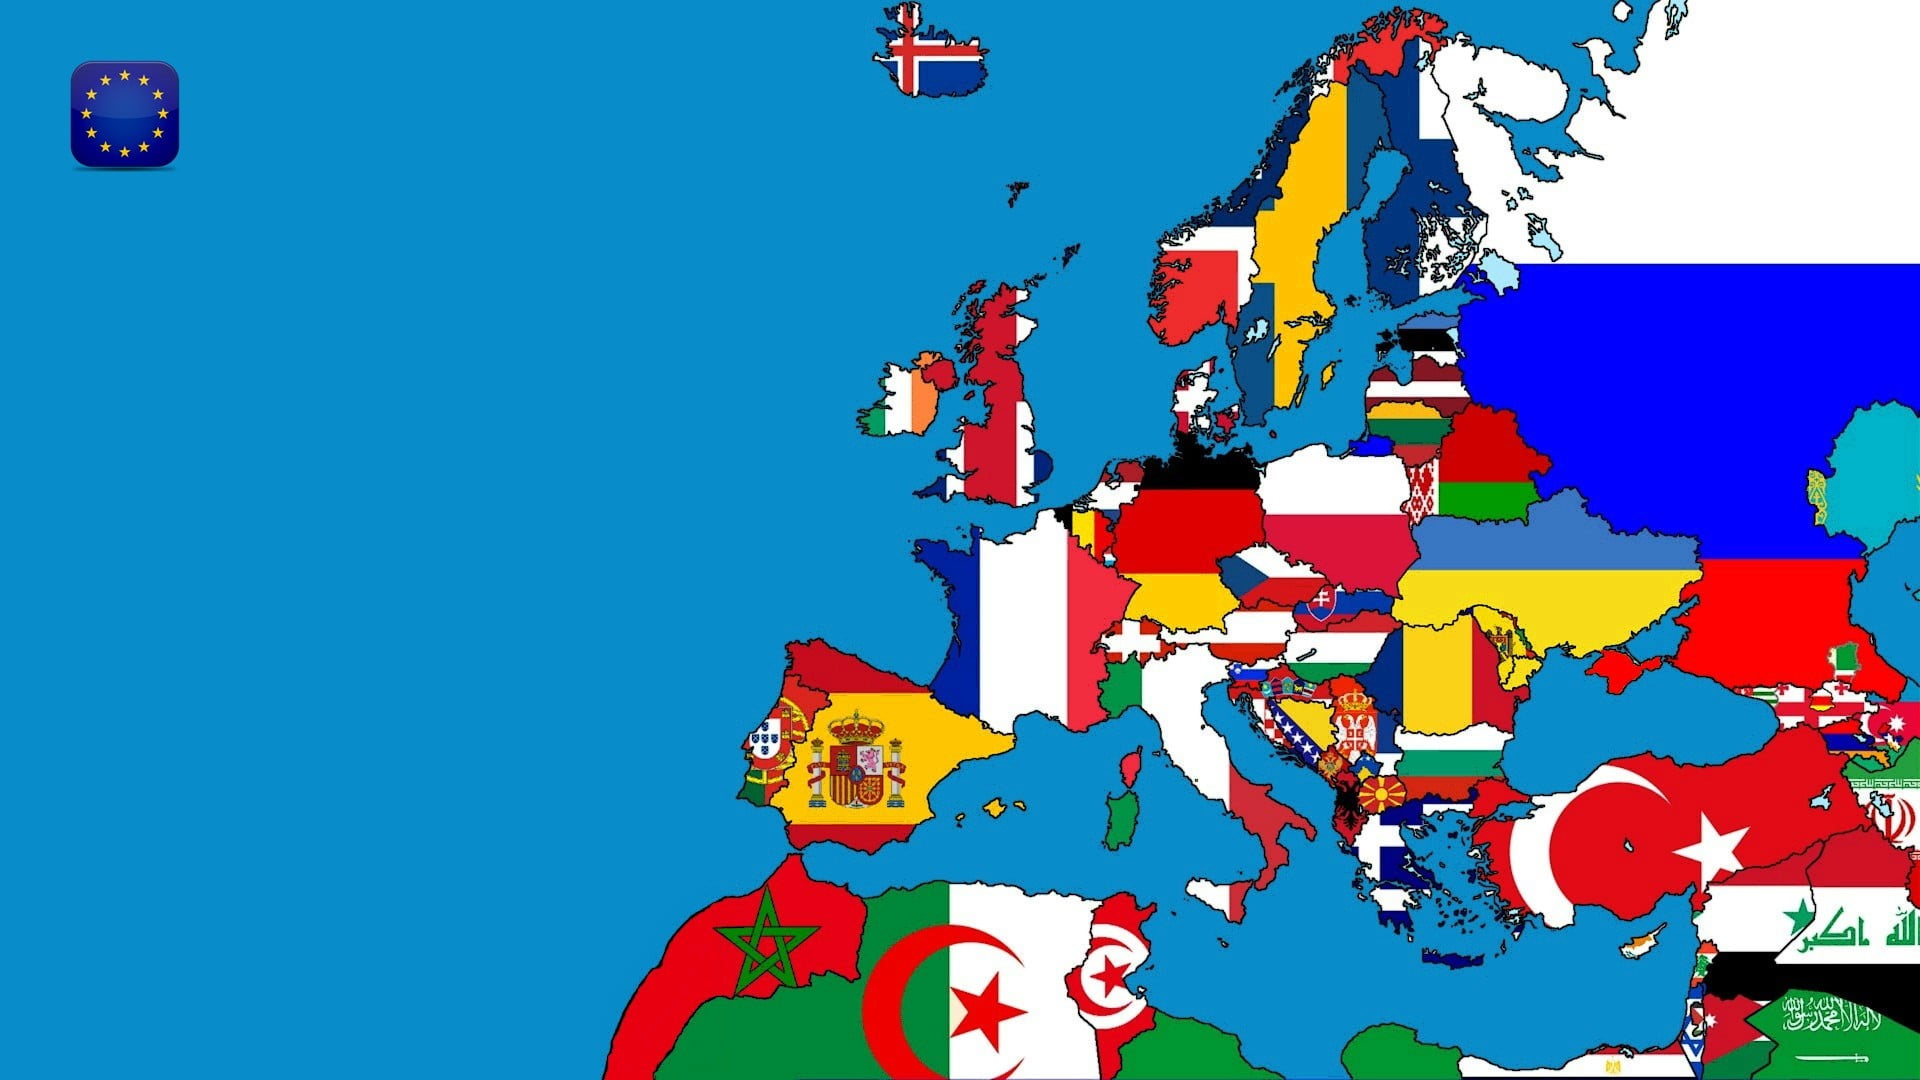 assorted flags on map illustration, map, Europe, countries, sea